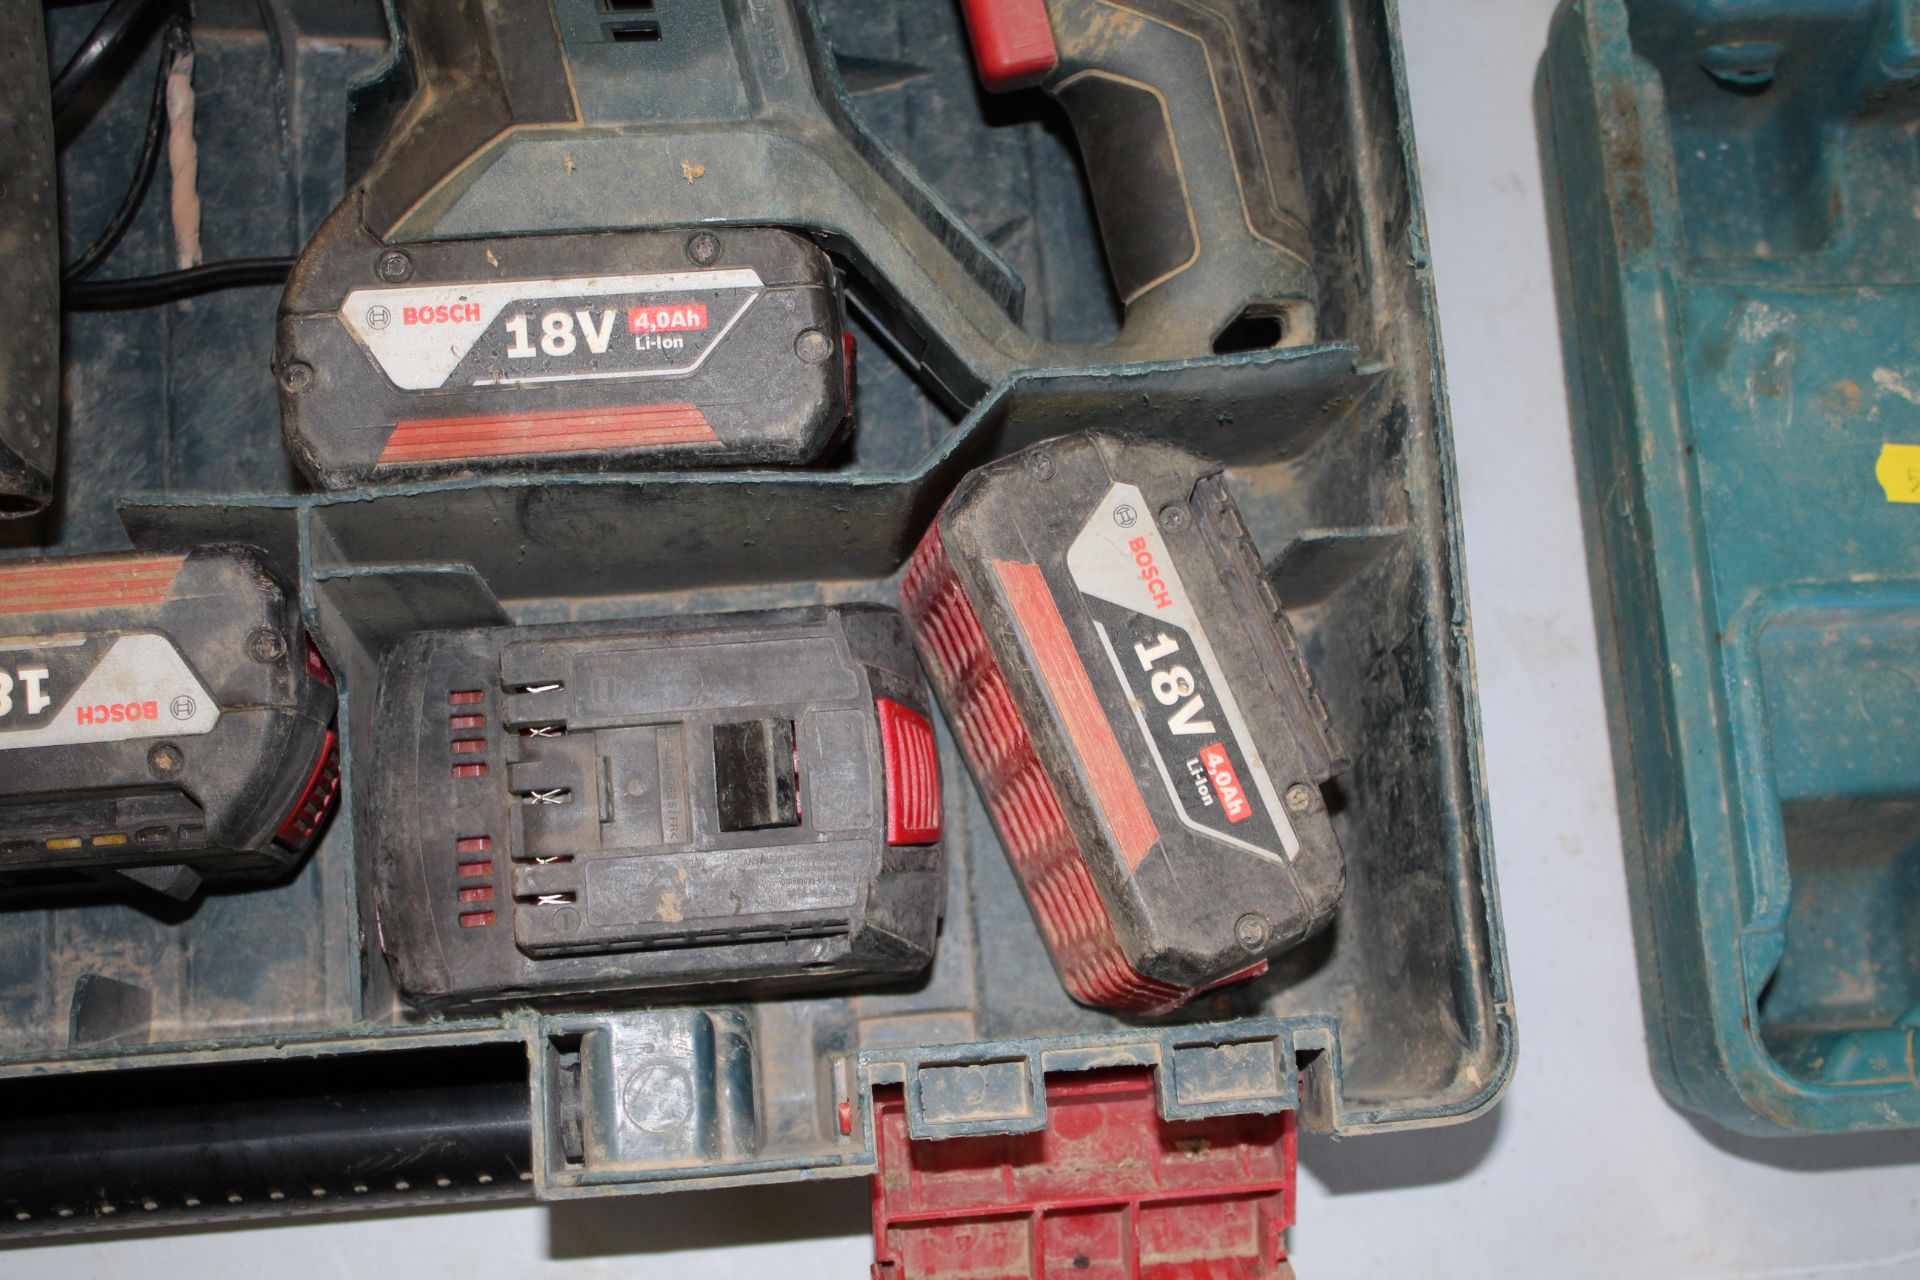 Bosch 18v professional cordless hammer drill with 4x batteries and charger in case. V CAMPSEA ASHE - Image 4 of 6